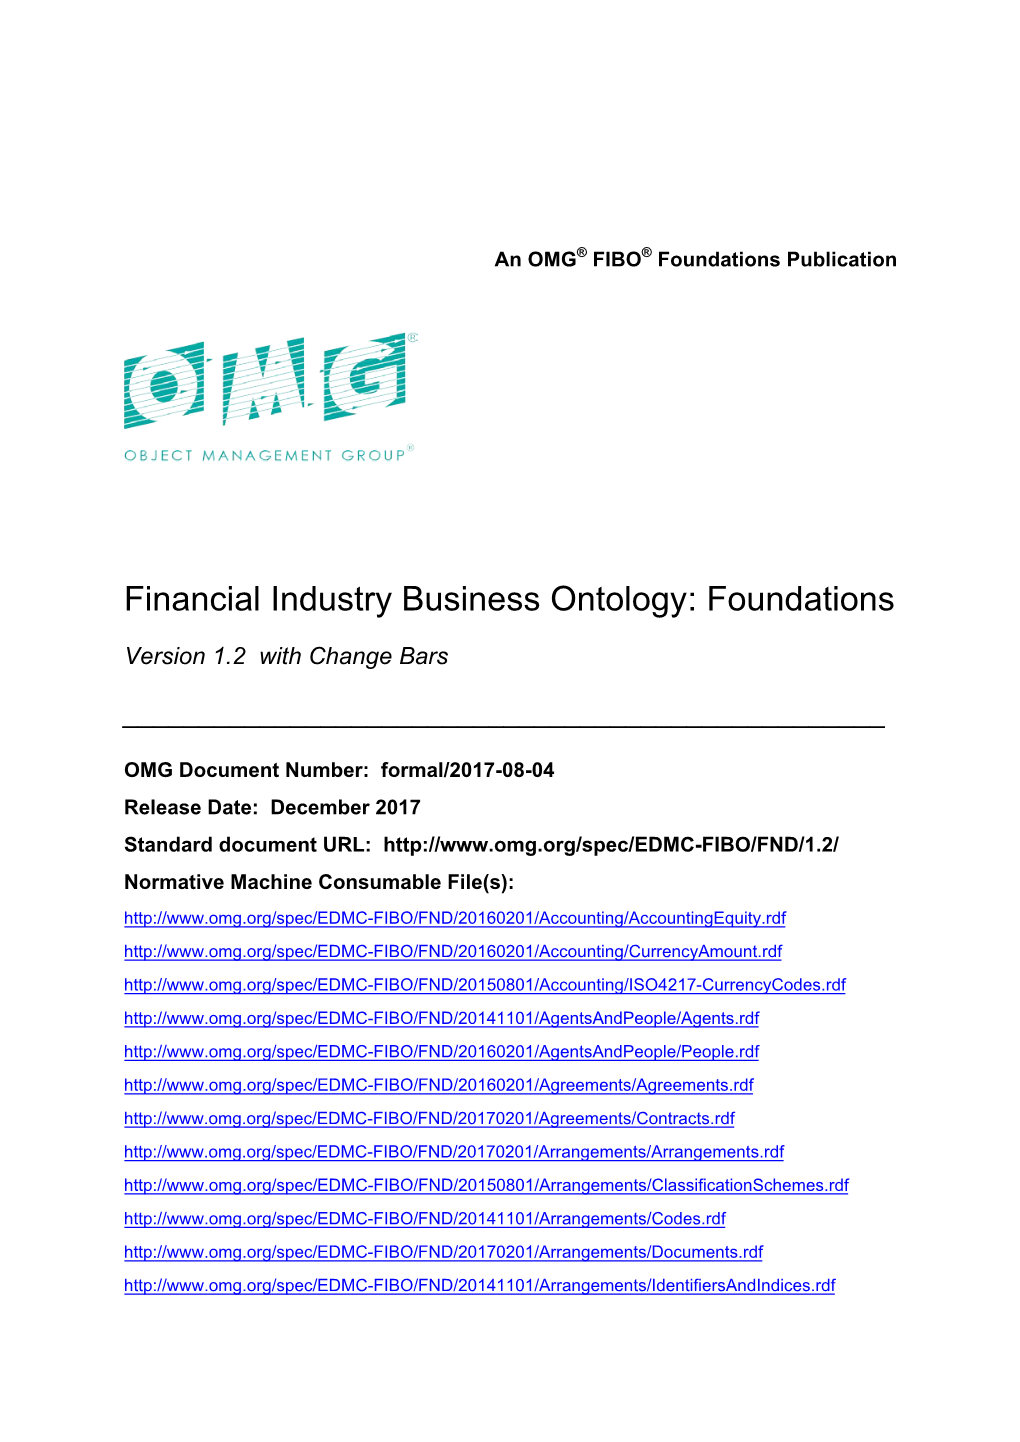 FIBO Foundations Models Define General Concepts That Are Not Unique to the Financial Industry, but Needed to Help Define the Financial Concepts